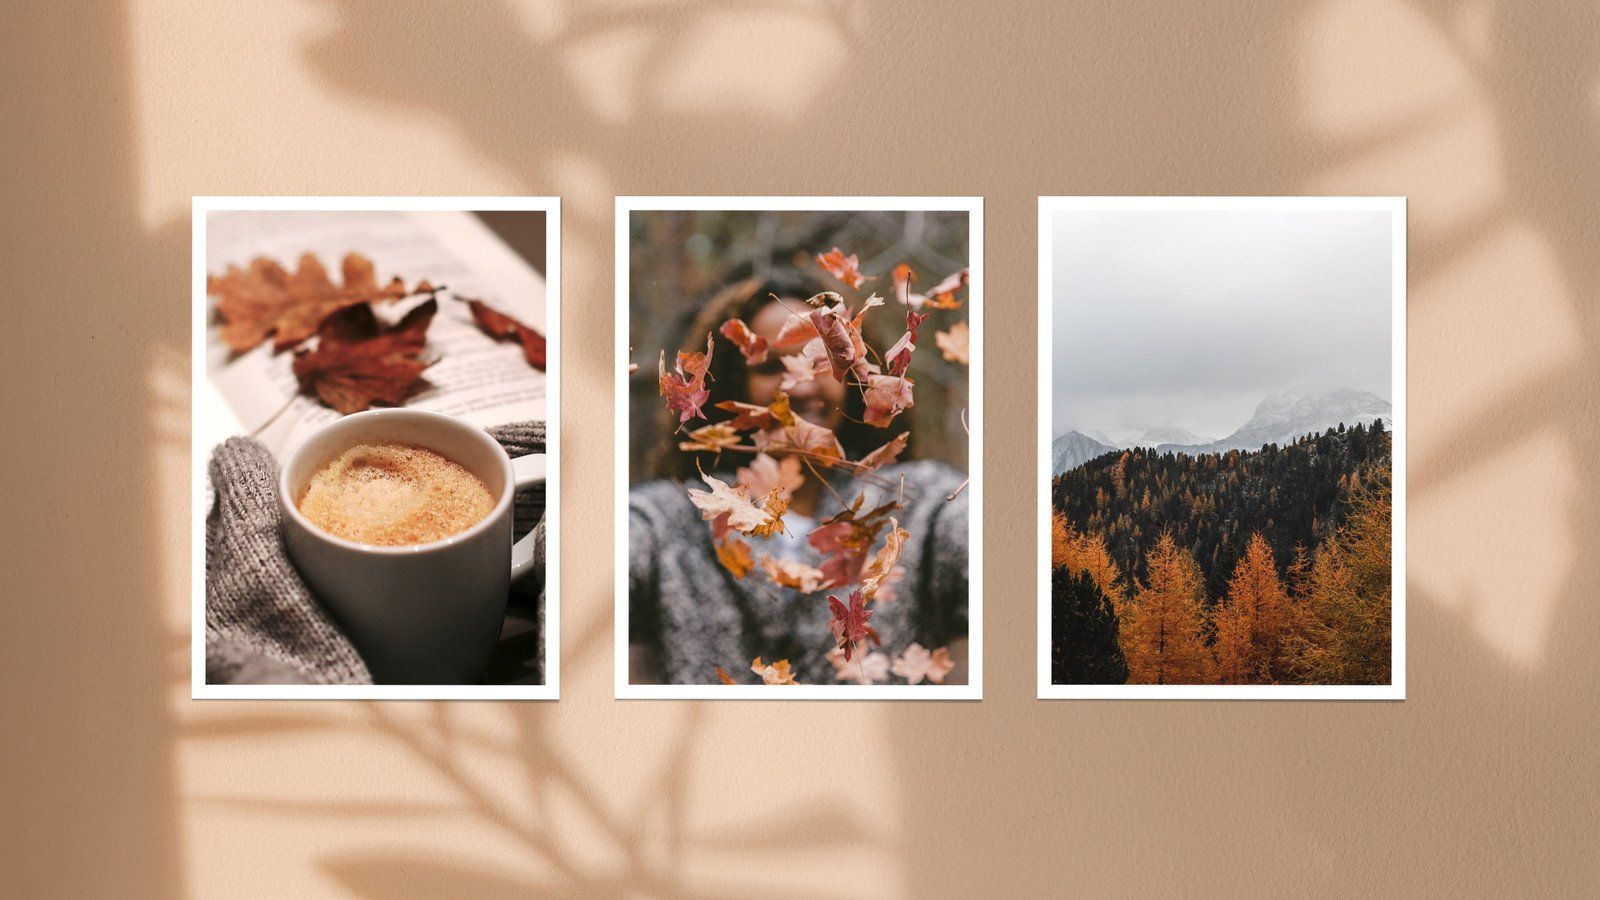 A photo of three pictures on the wall - Cozy, vintage fall